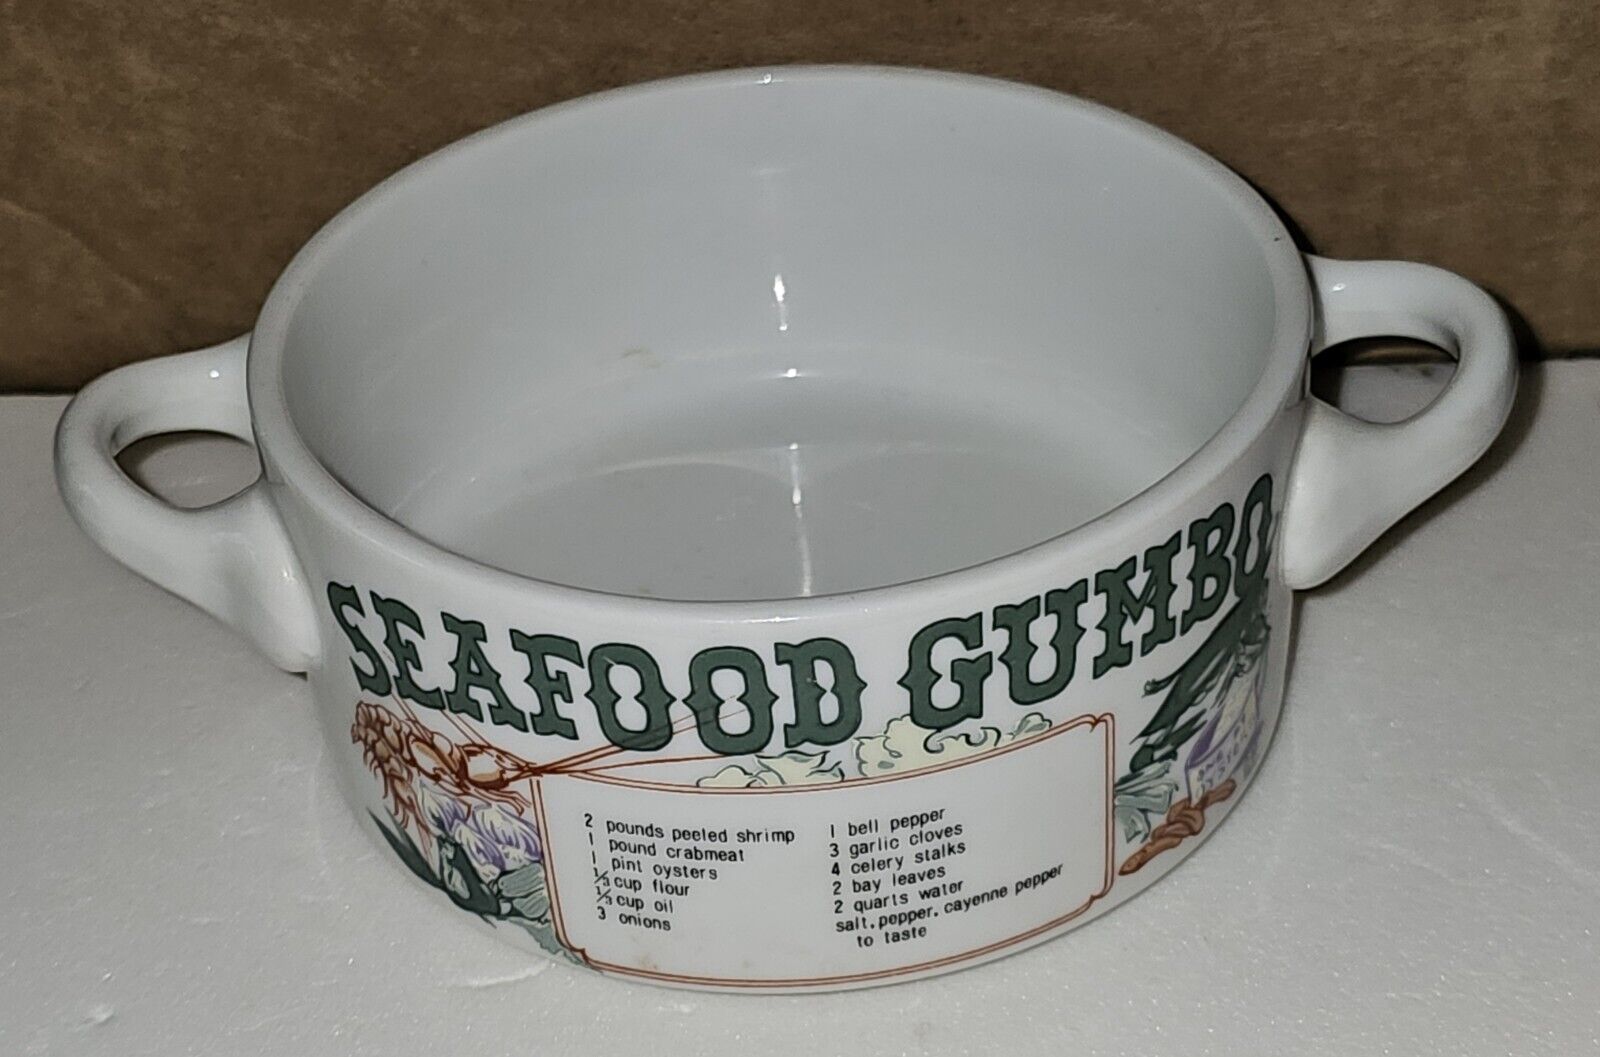 Ljungberg Collection 1978 Seafood Gumbo Recipe Soup Bowl With Handles